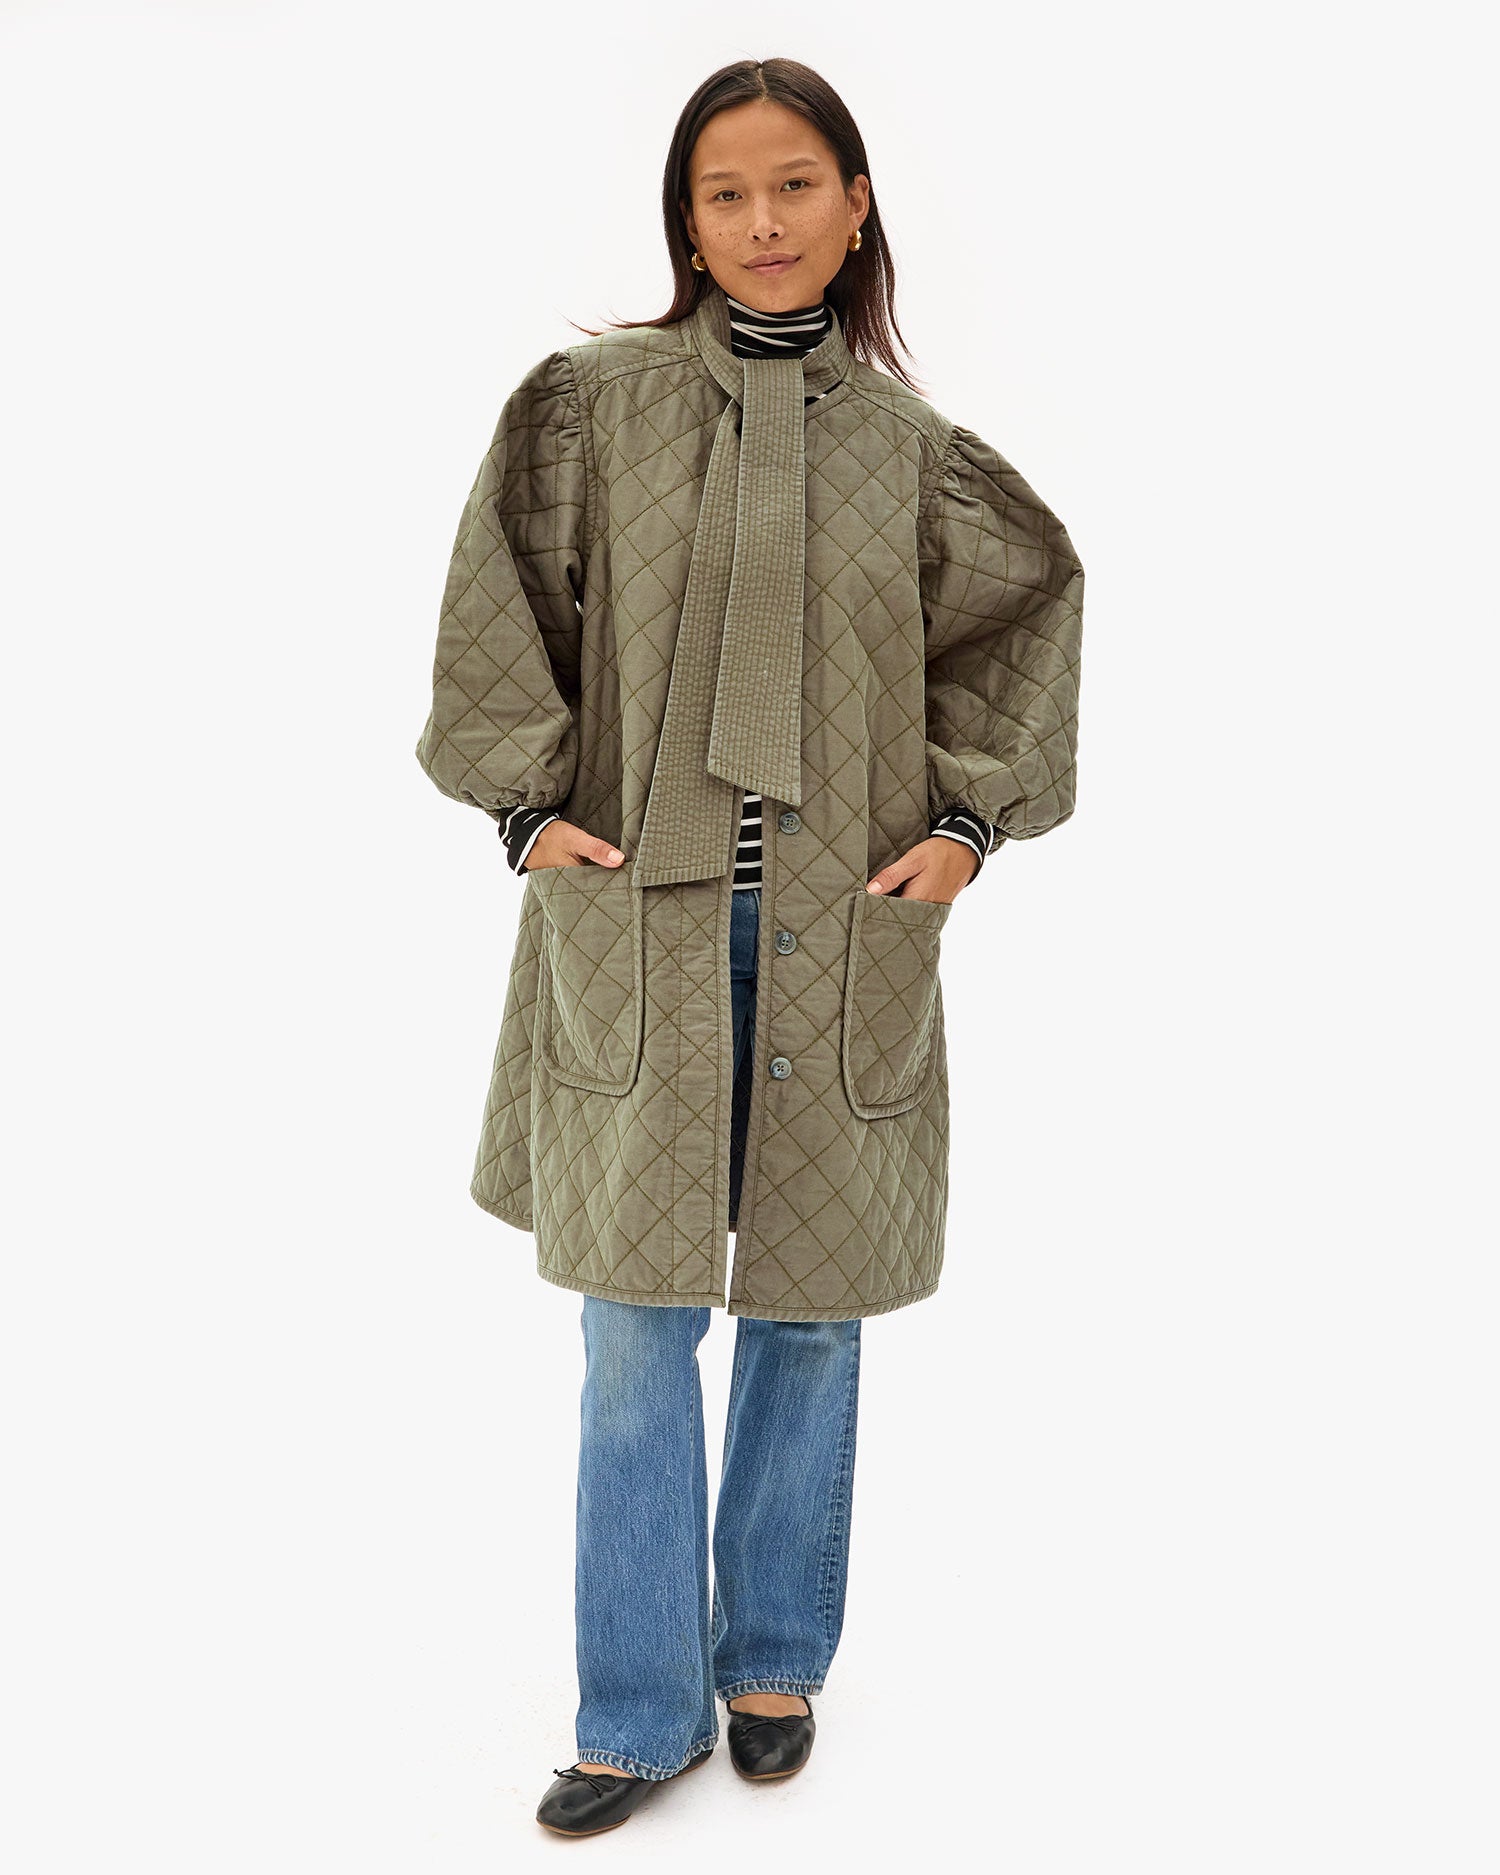 Maly wearing the Olive Quilted Clemence Car Coat and tucking her hands in the front pockets. 